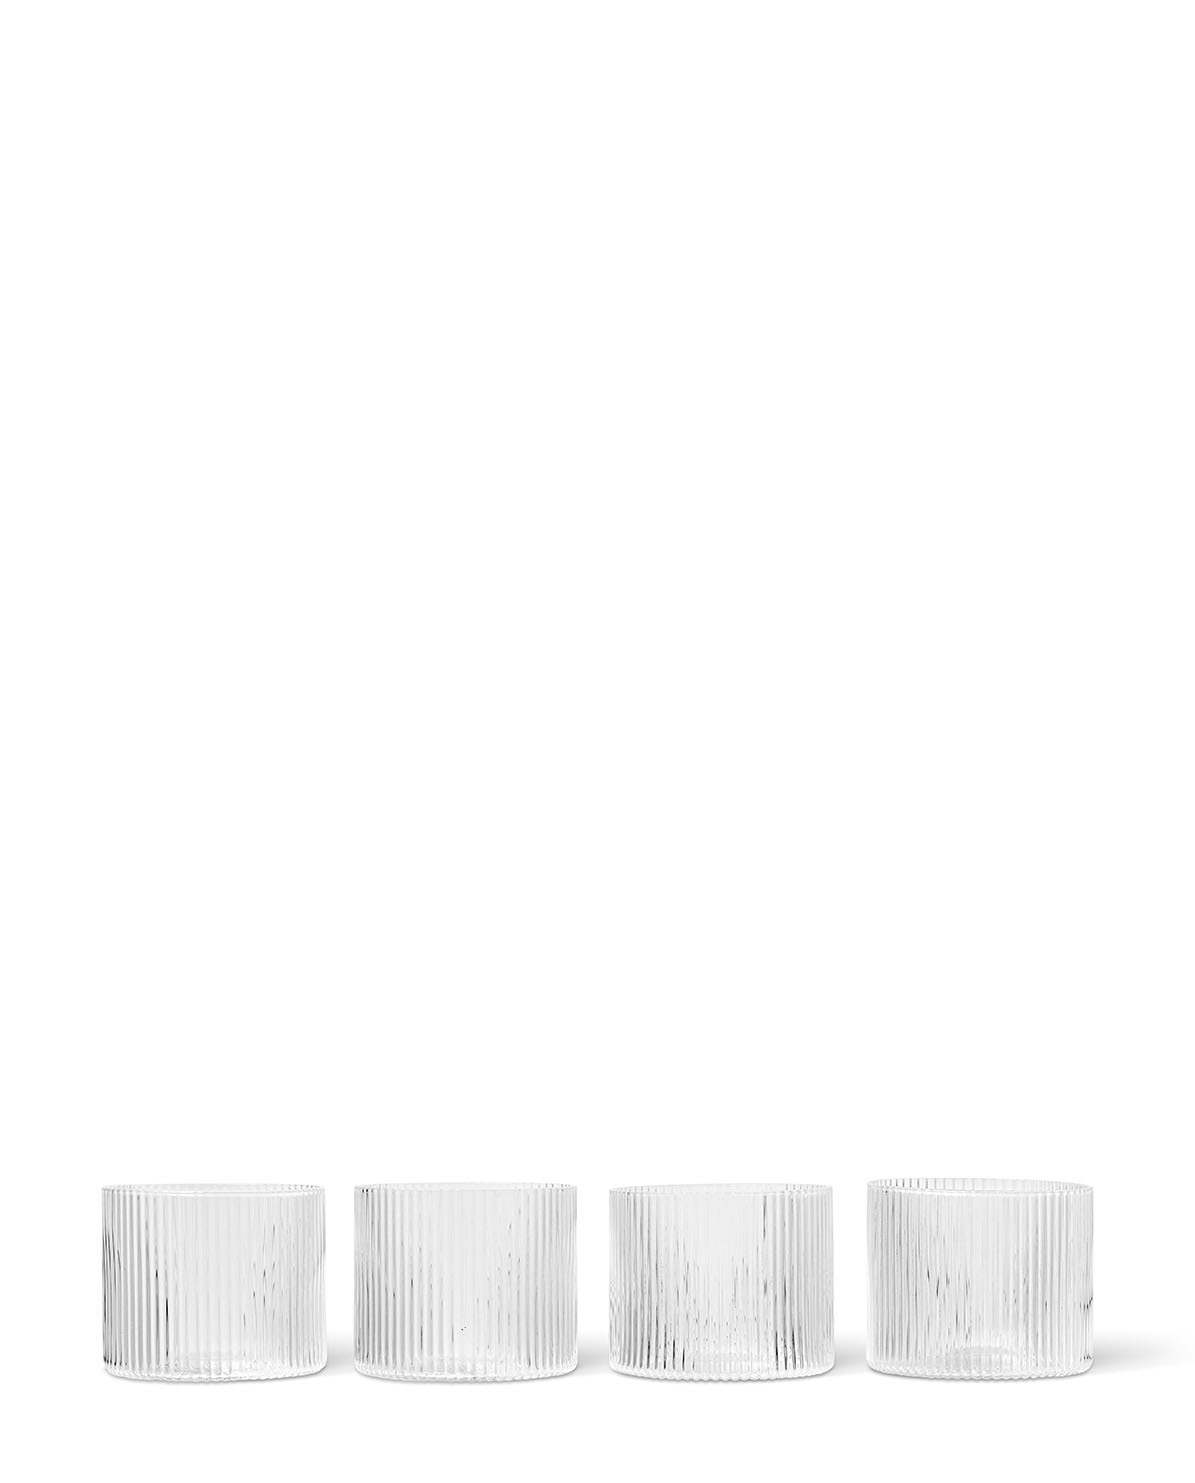 ferm living ripple low glasses - set of 4 - clear durchsichtig